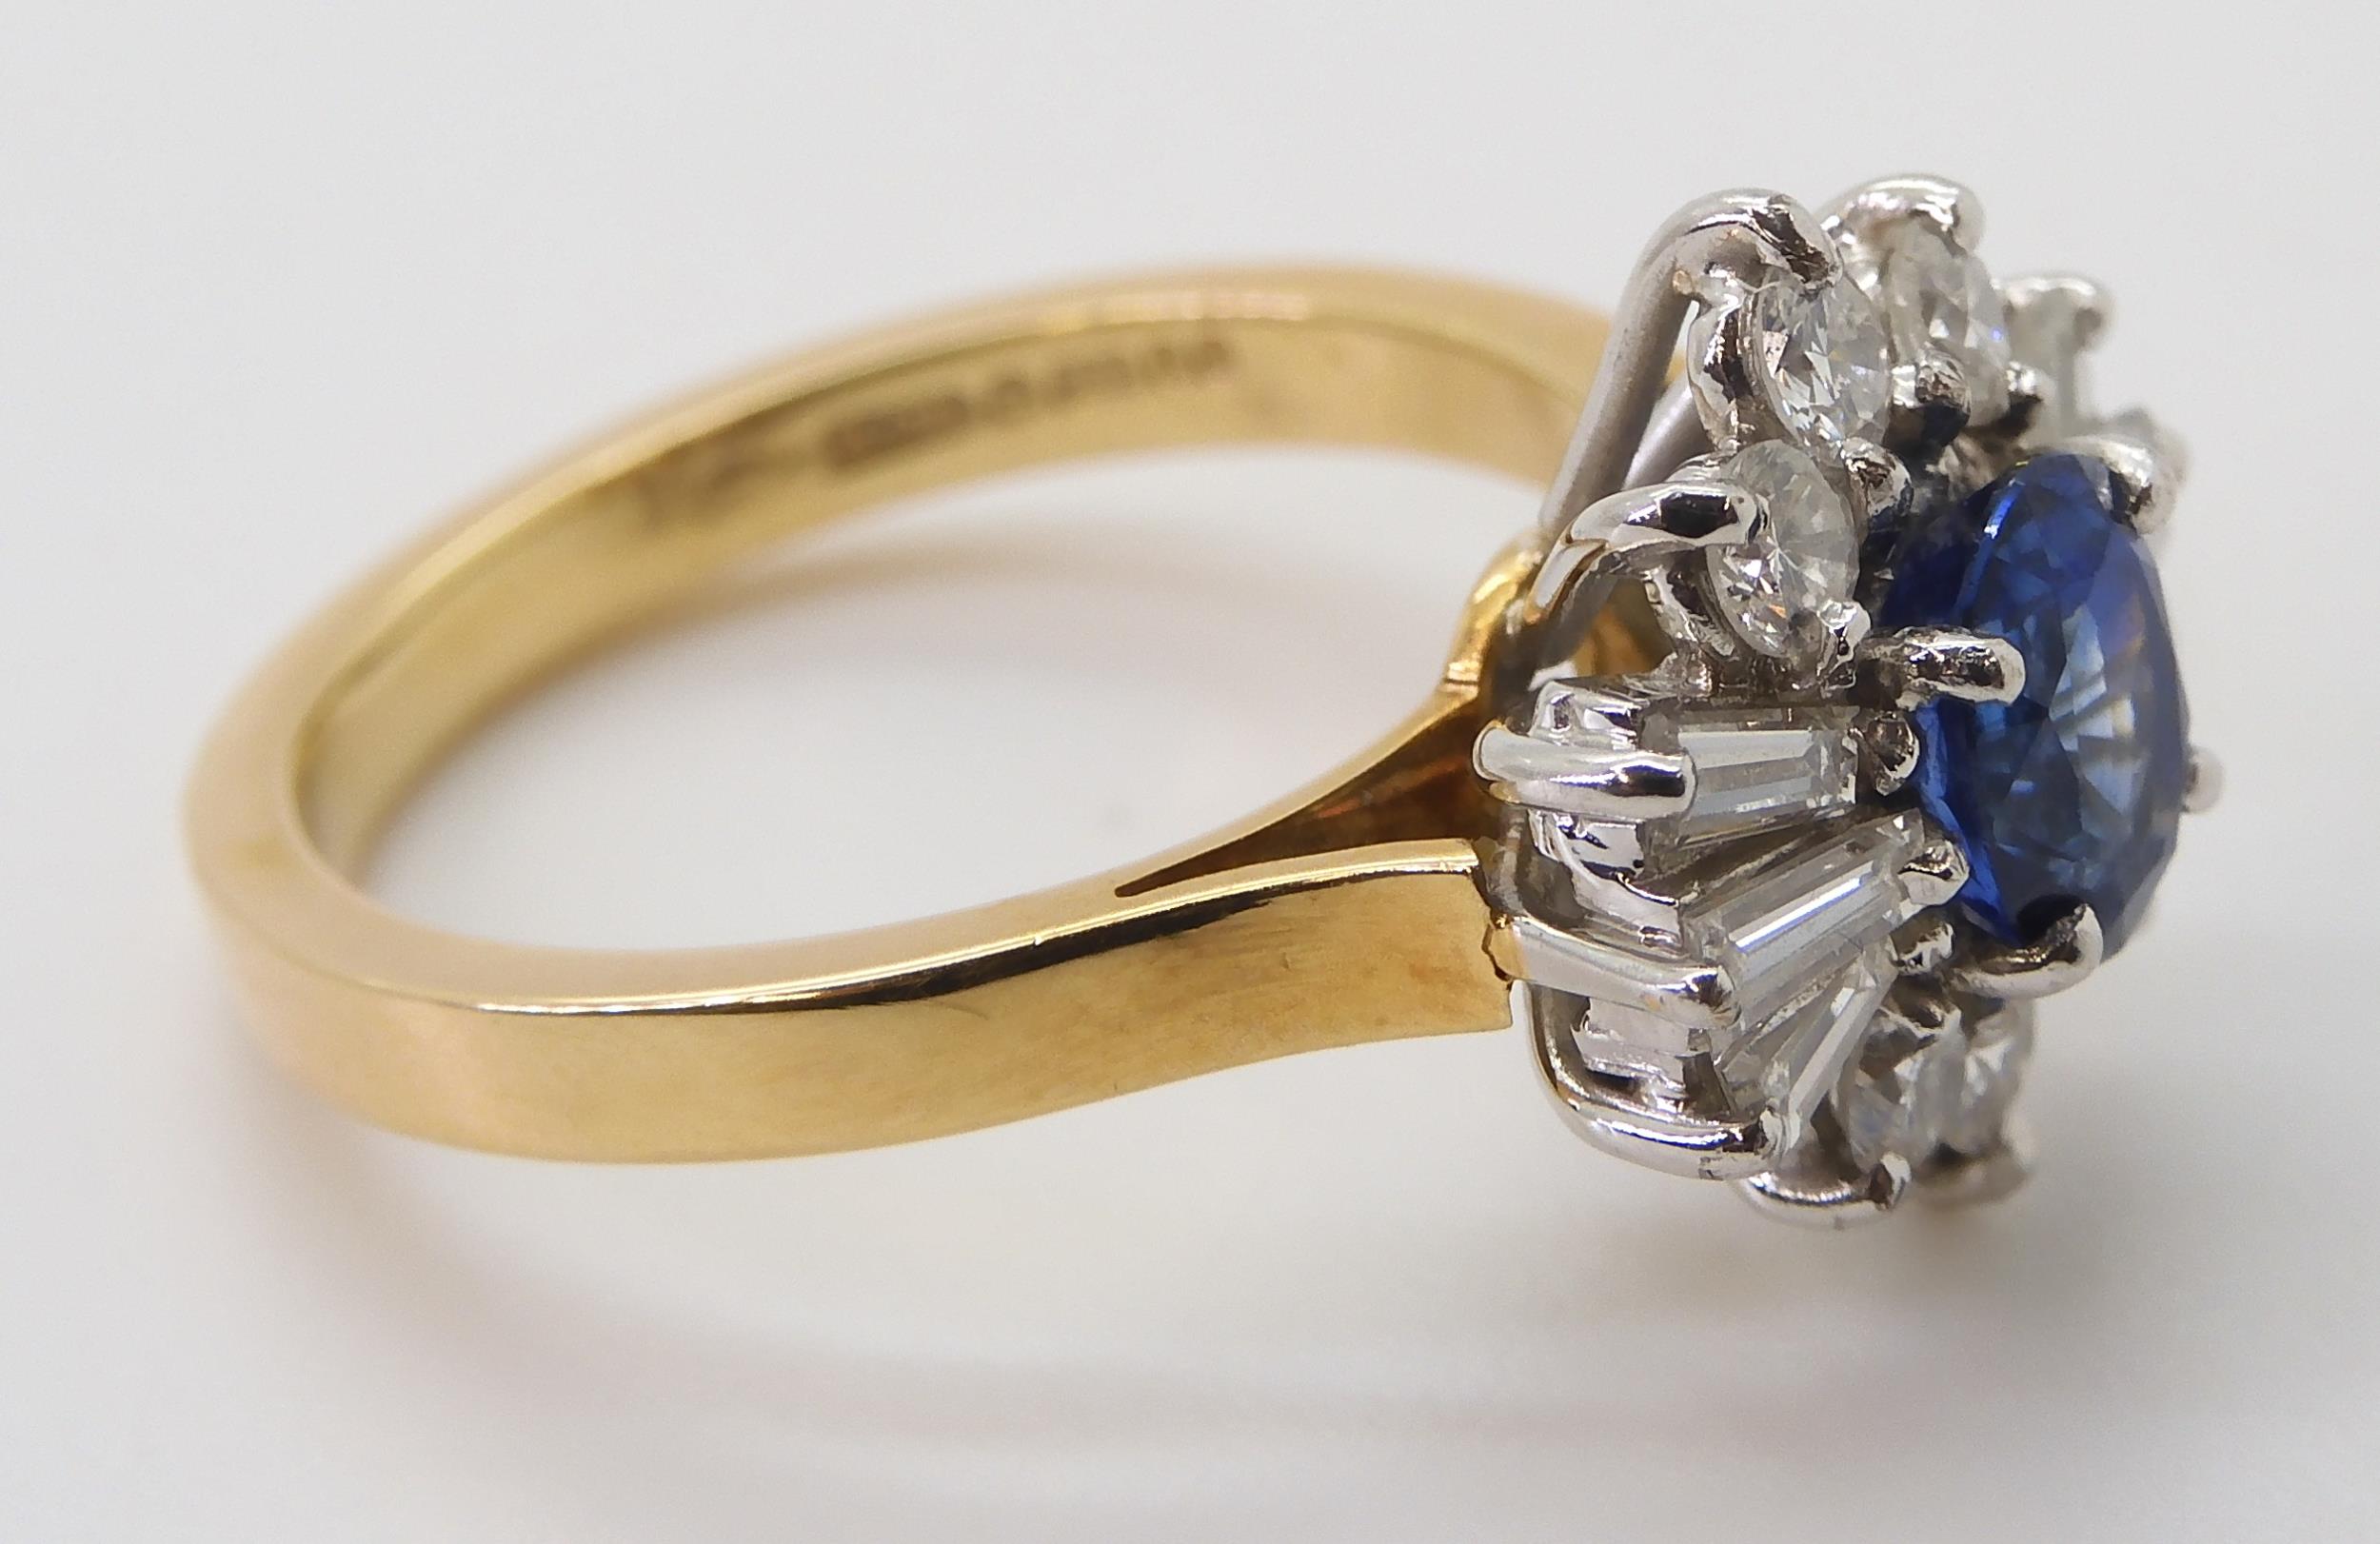 A SAPPHIRE & DIAMOND CLUSTER RING set in 18ct yellow and white gold, the starburst configuration - Image 7 of 8